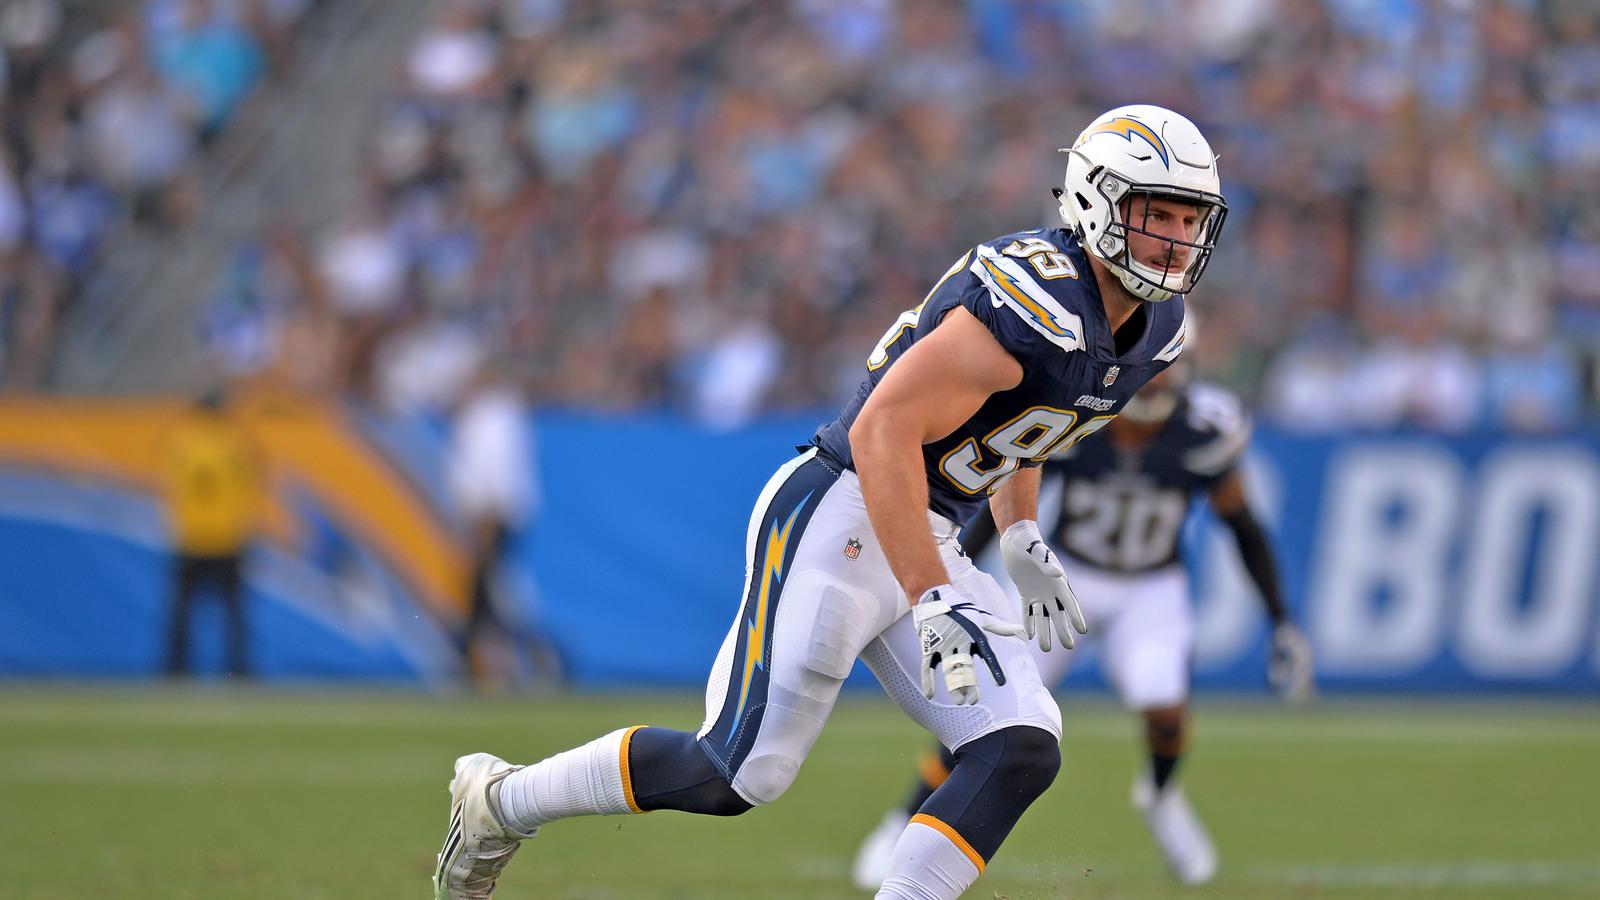 WATCH: Joey Bosa Sack Leads To 76 Yard Chargers Touchdown